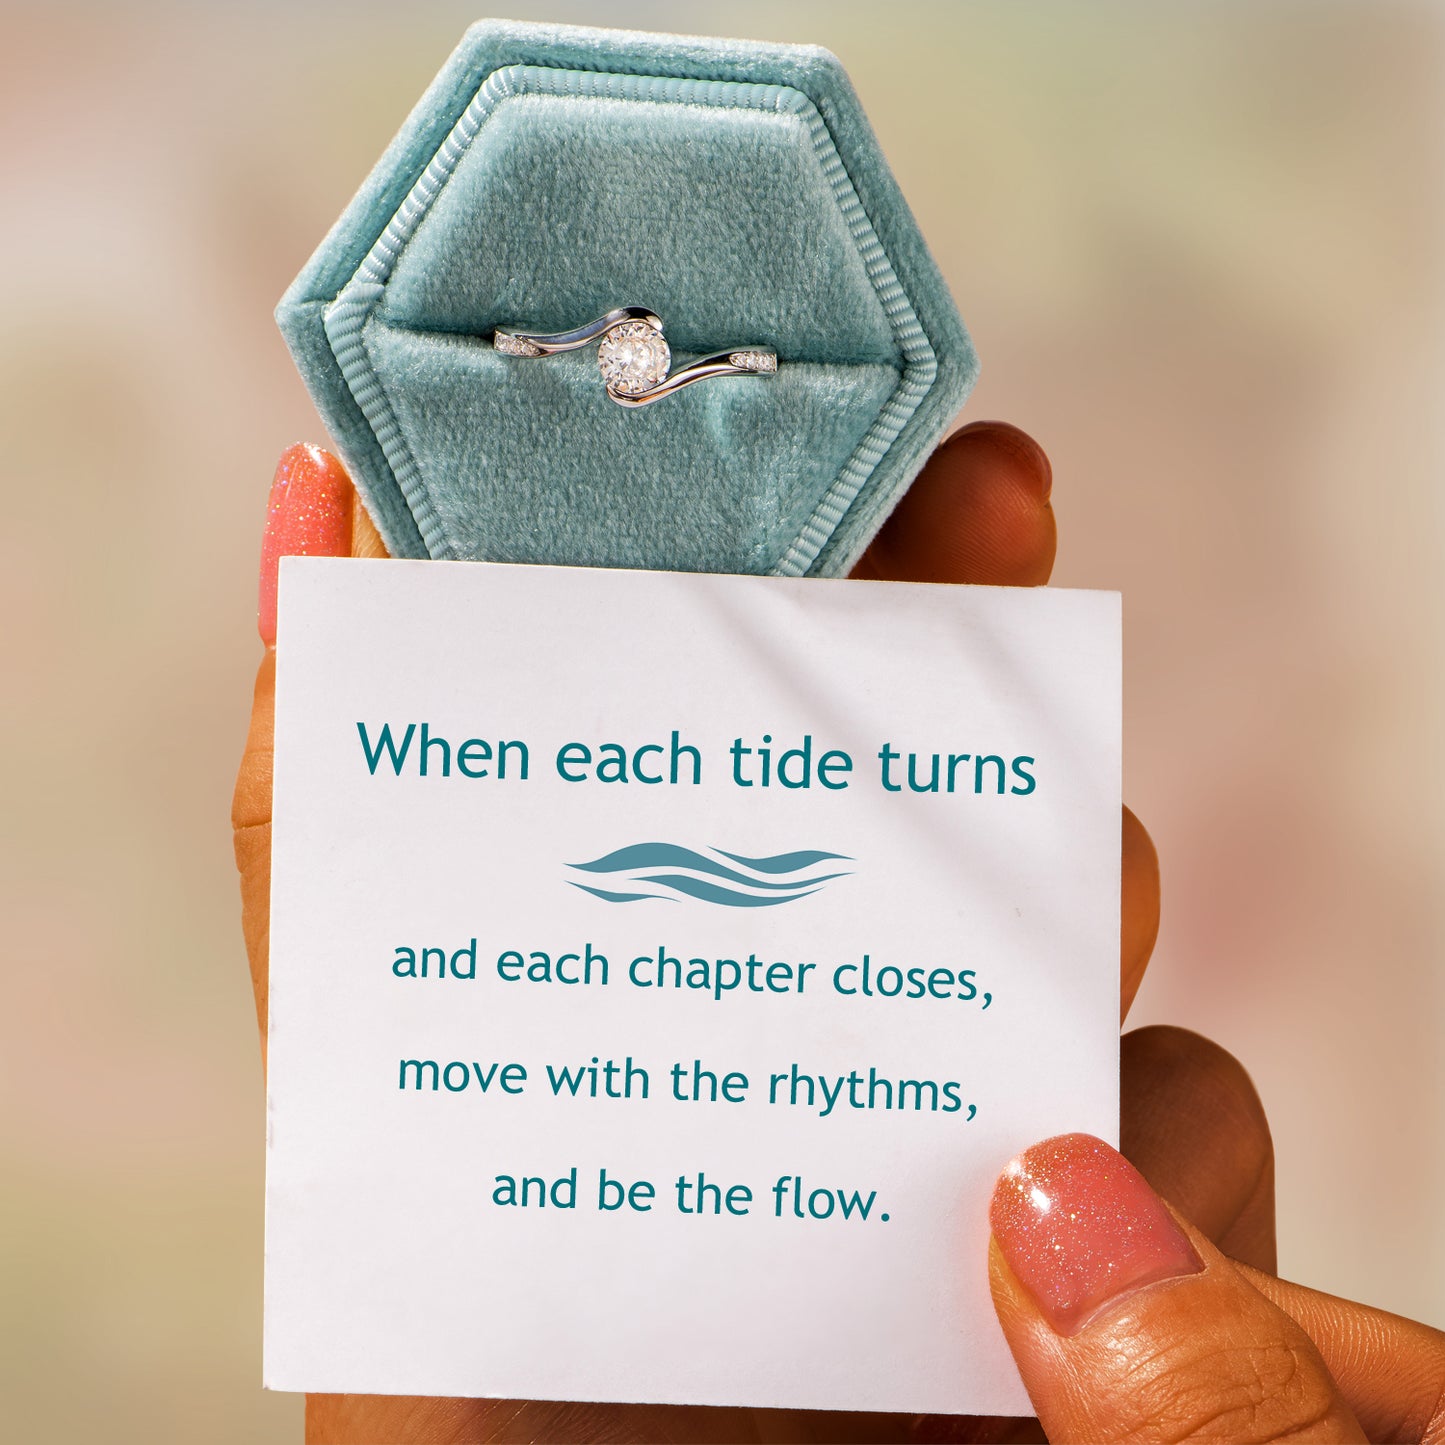 "When each tide turns, and each chapter closes, move with the rhythms, and be the flow" Ring